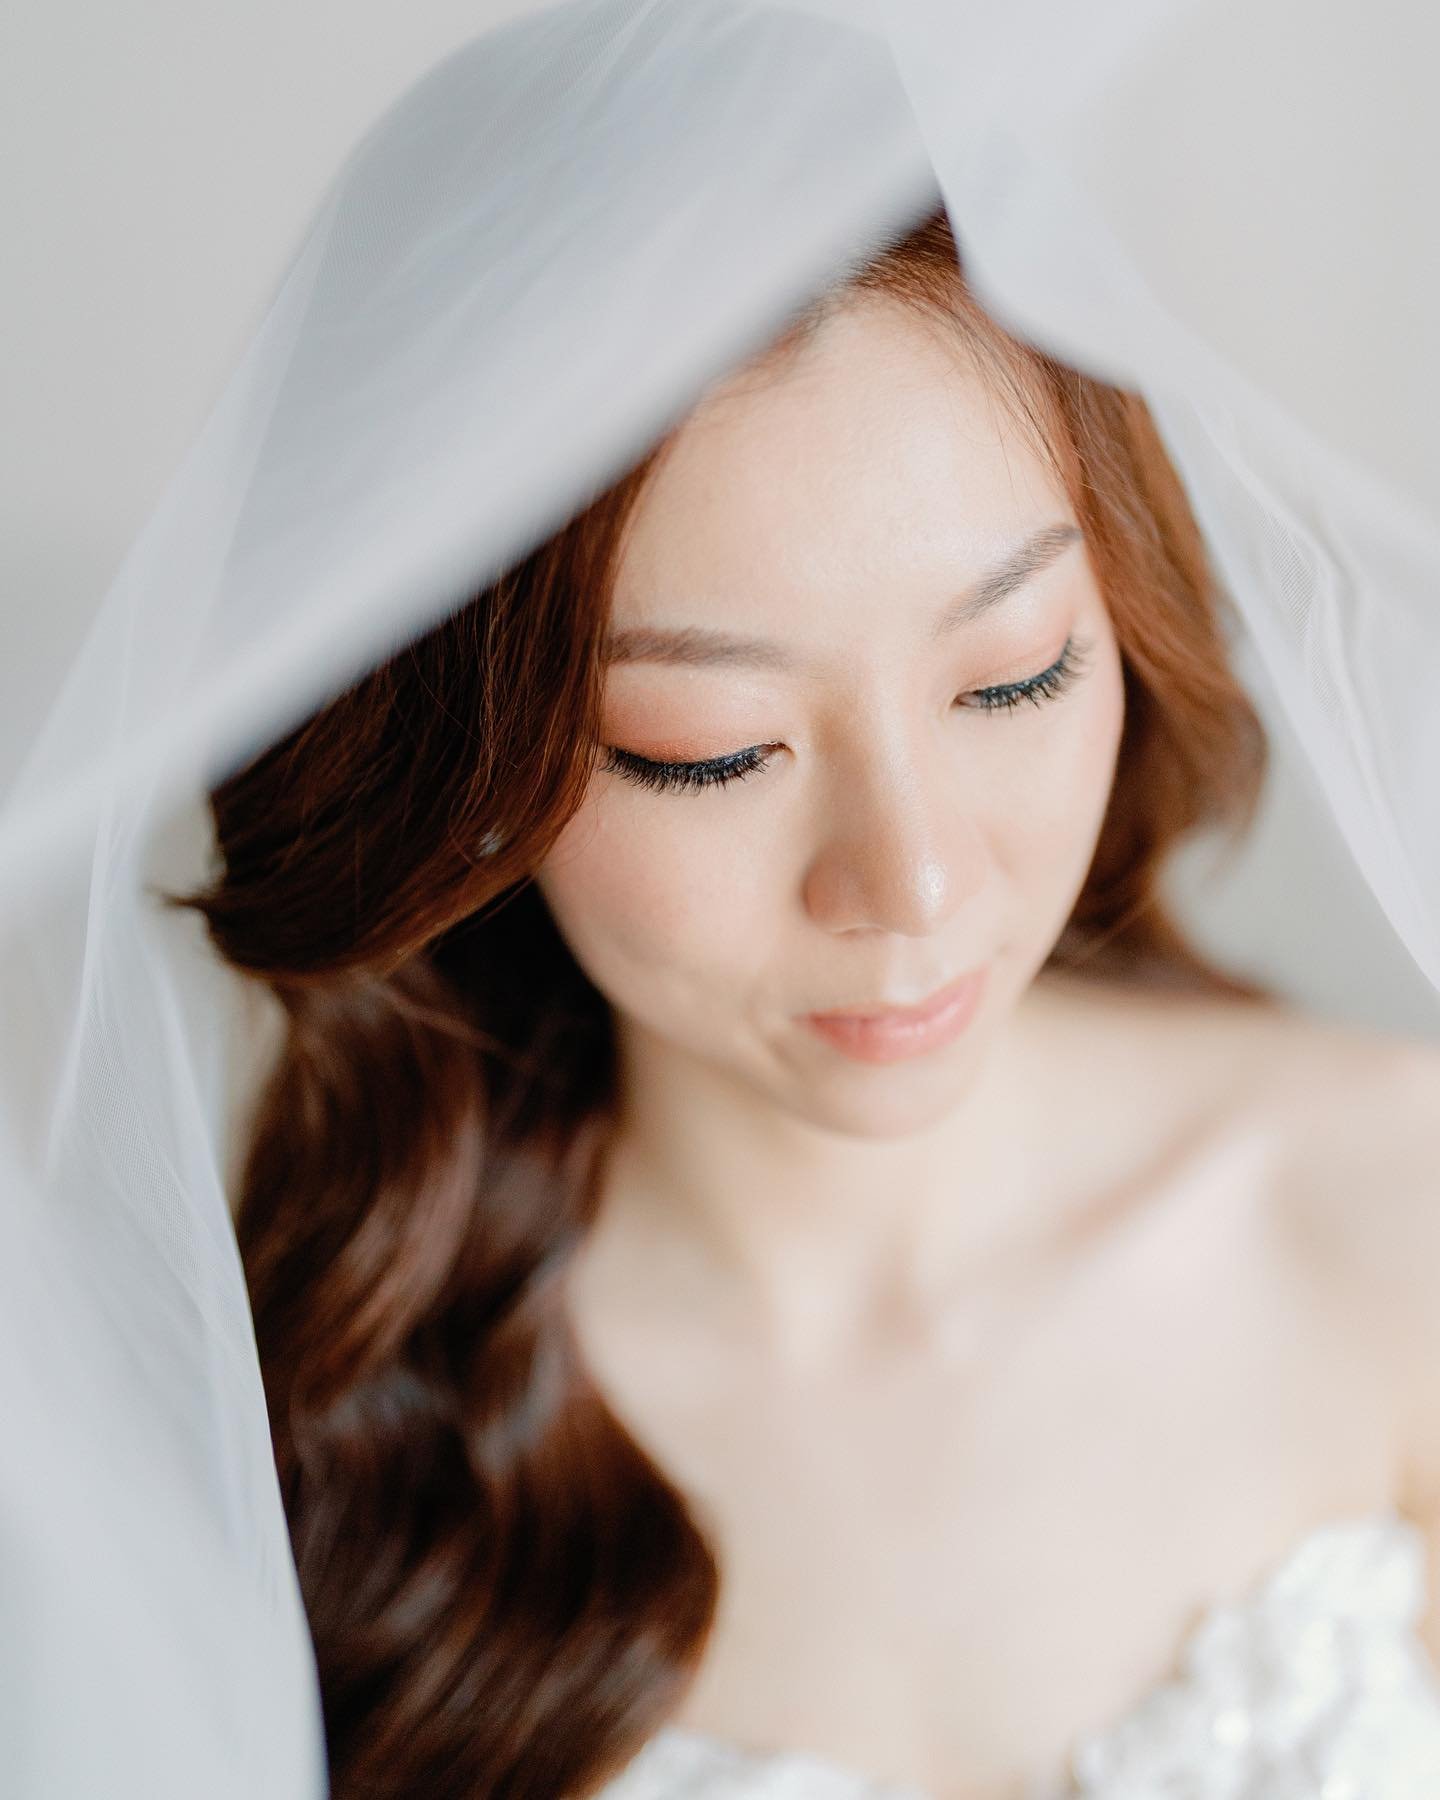 There is a hushed excitement as the bride takes a moment to herself before the hectic wedding day begins. 
-
We often advise our couples to set some time in the morning to capture some quiet moments like these.
-
Photo @antelopestudios 
Video @wemade